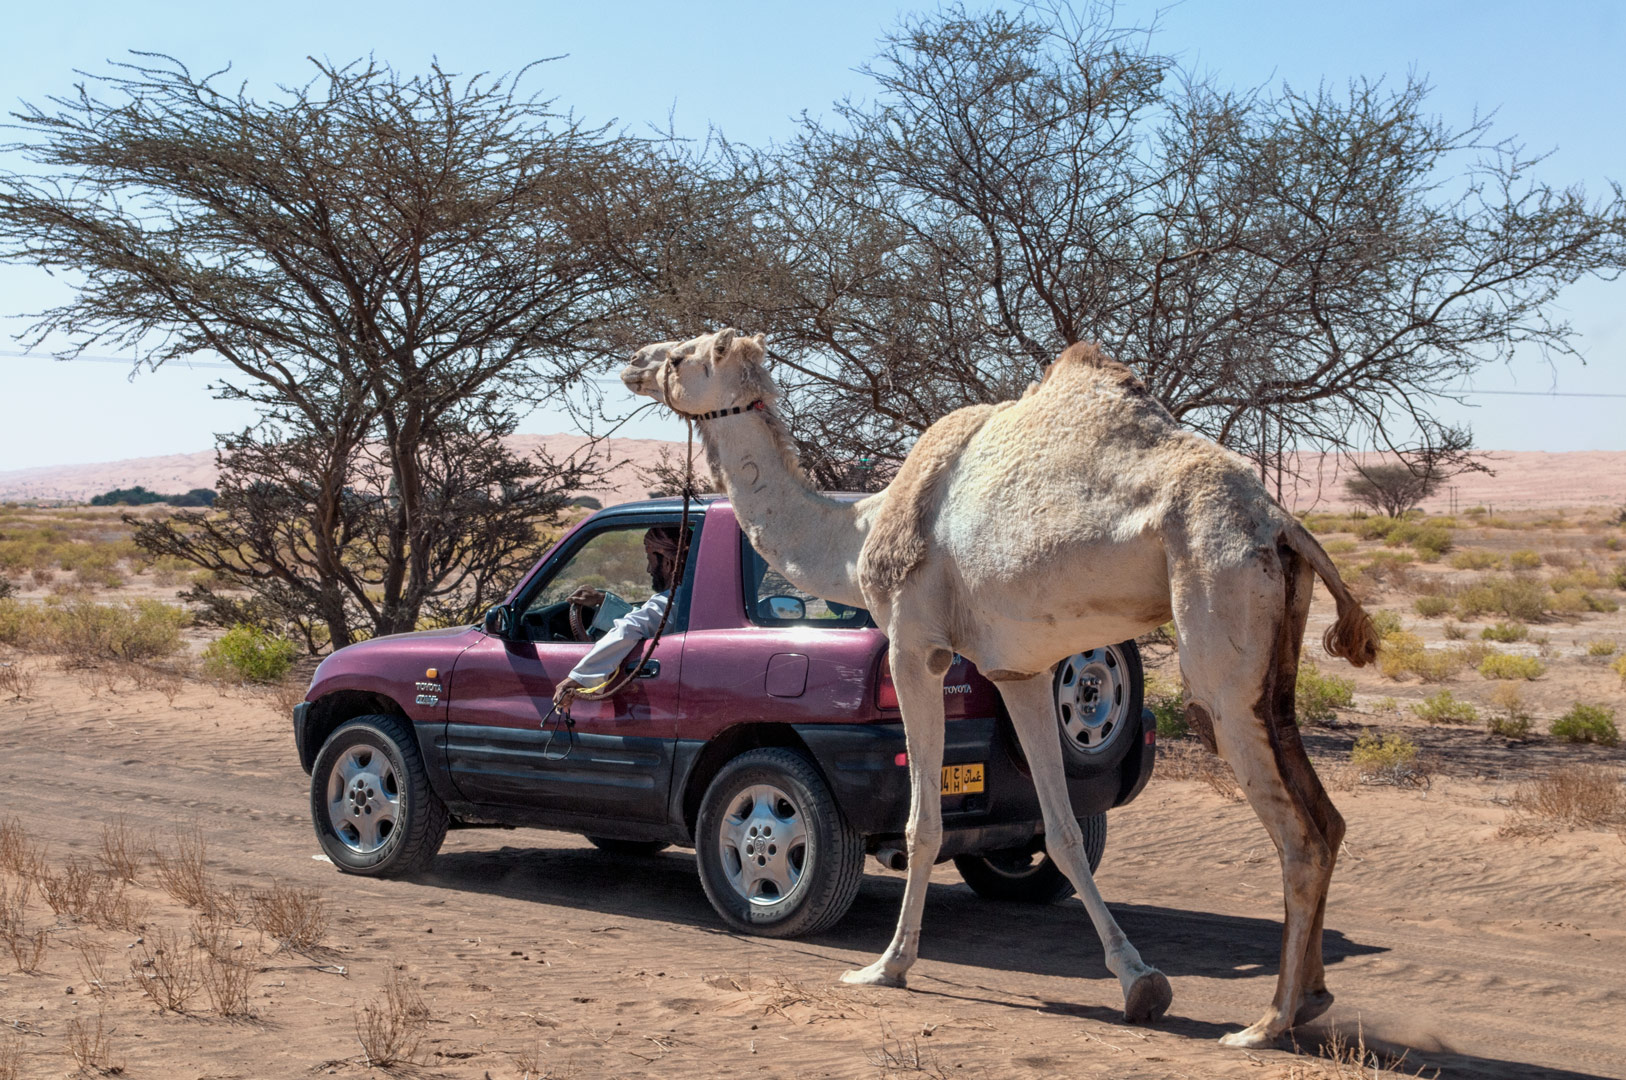 An Omani walks his camel while driving his truck.